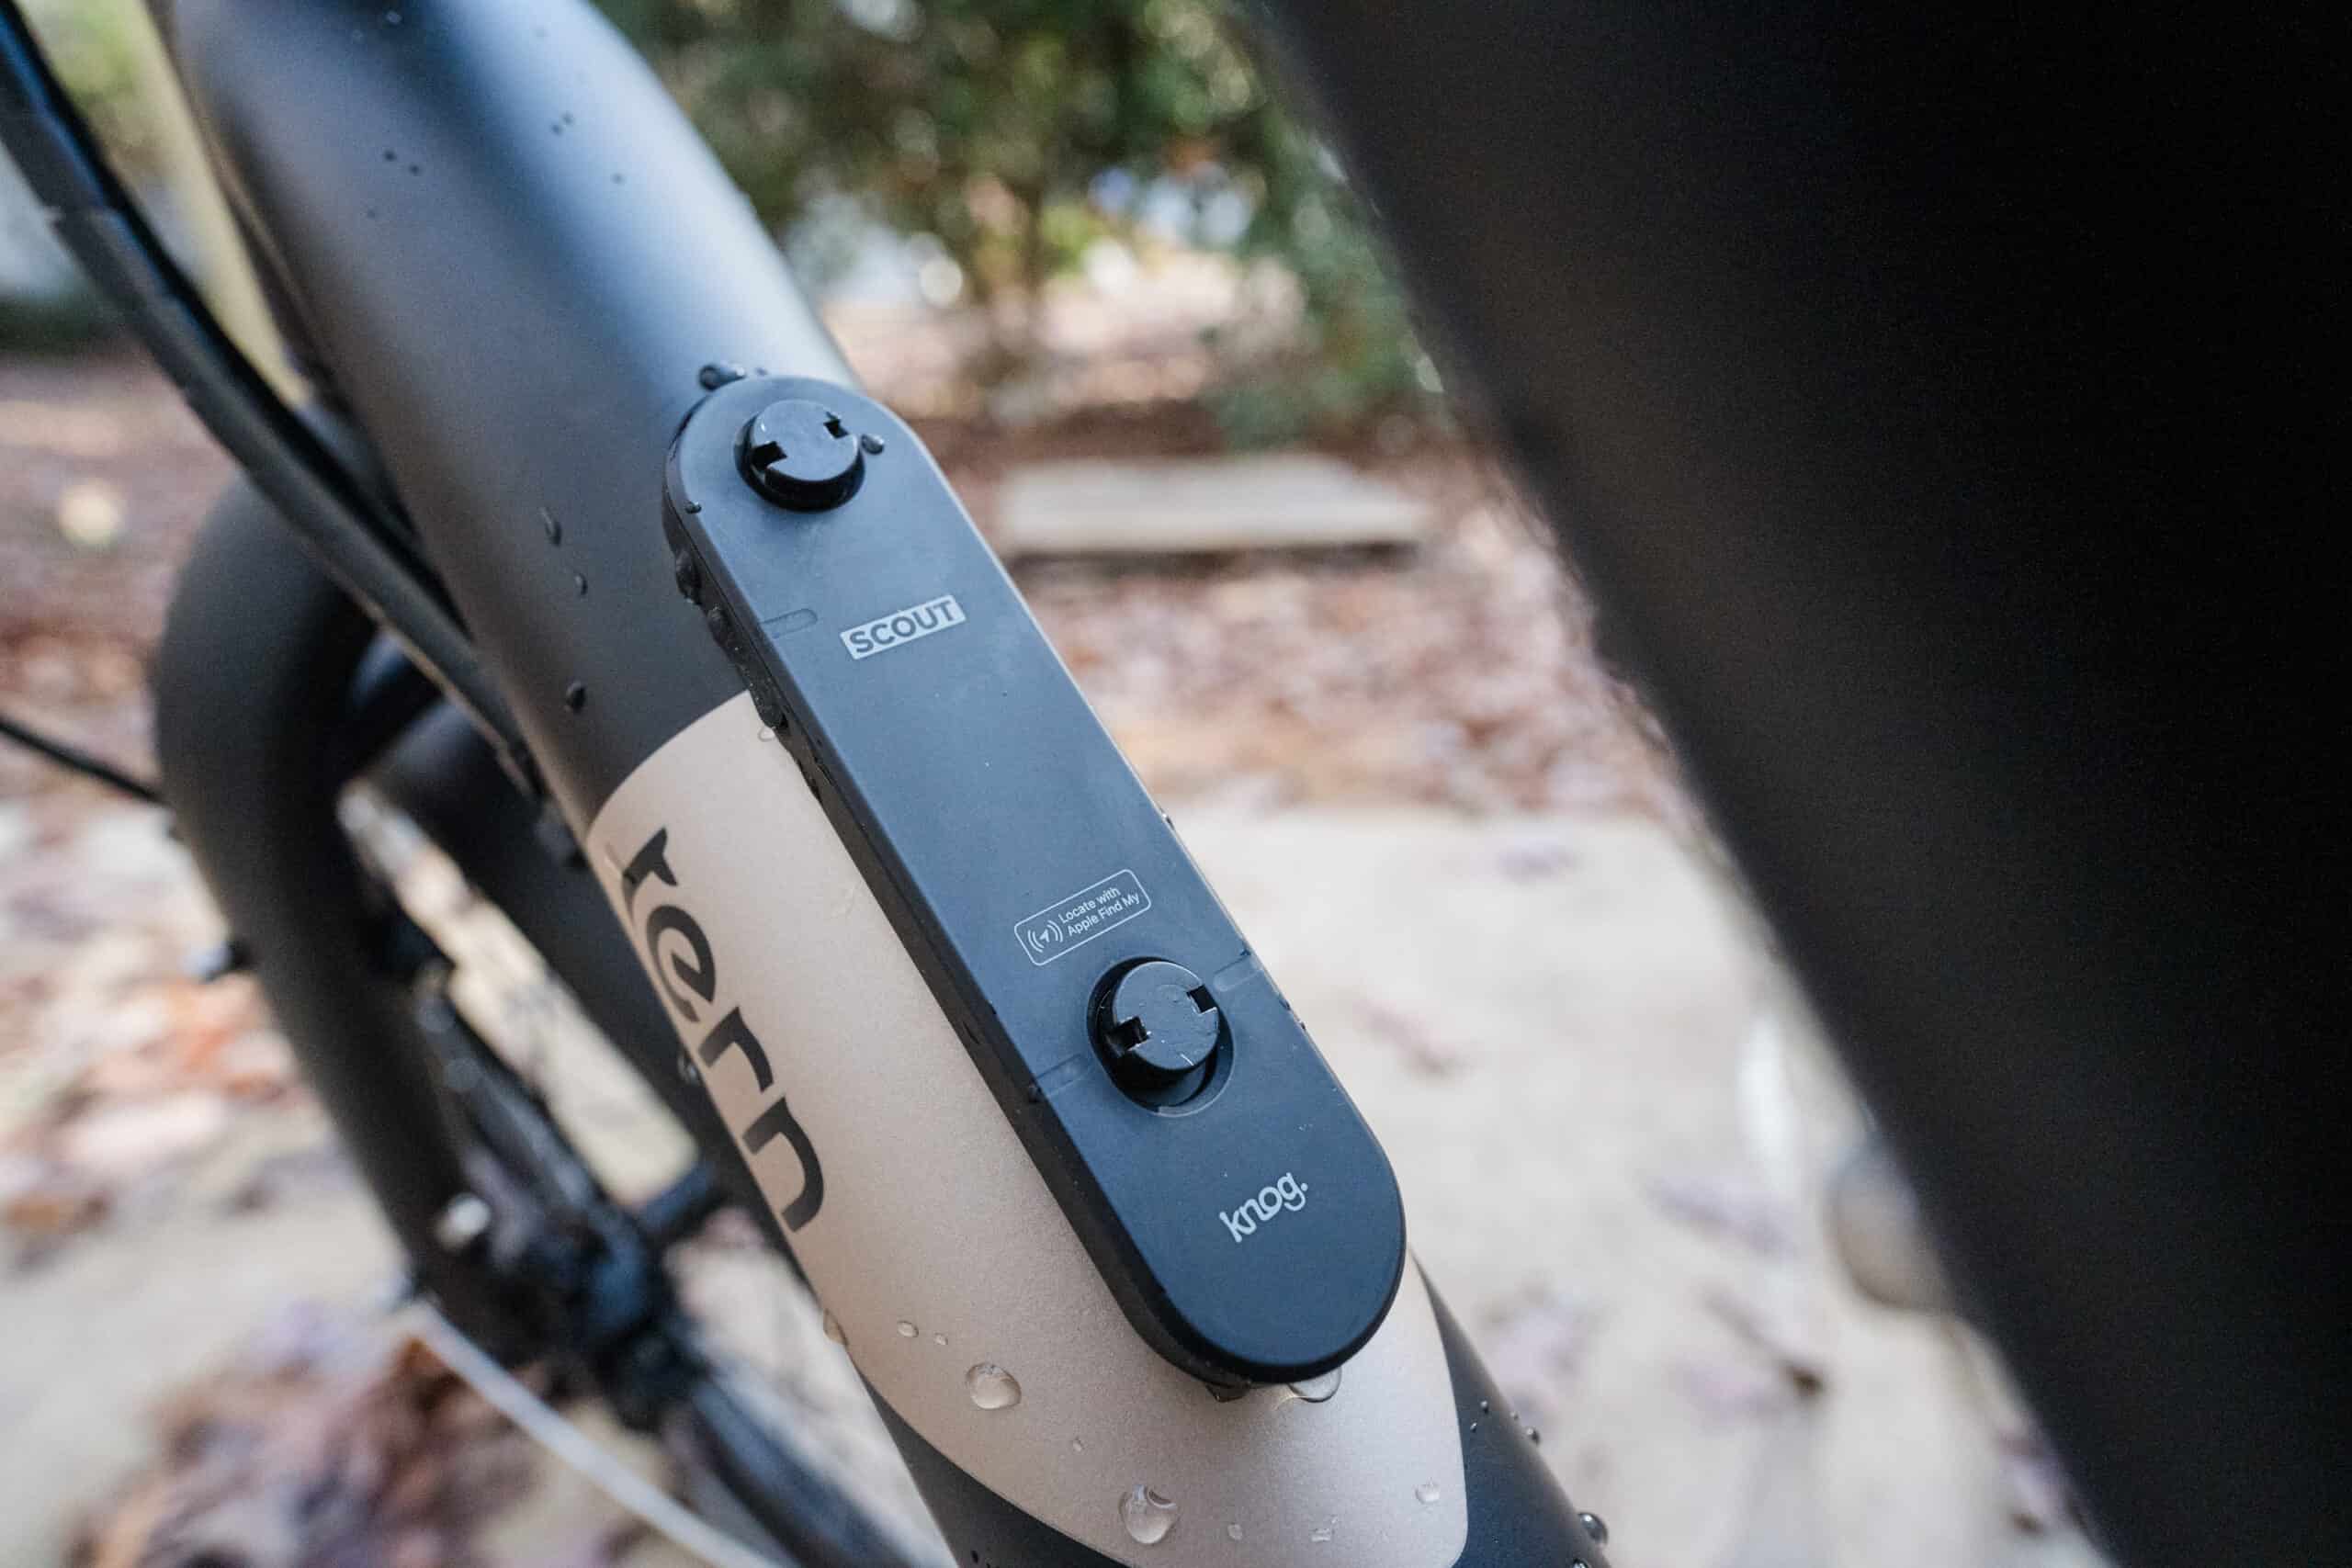 Knog Scout Bike Alarm and Full Review - Bike Shop